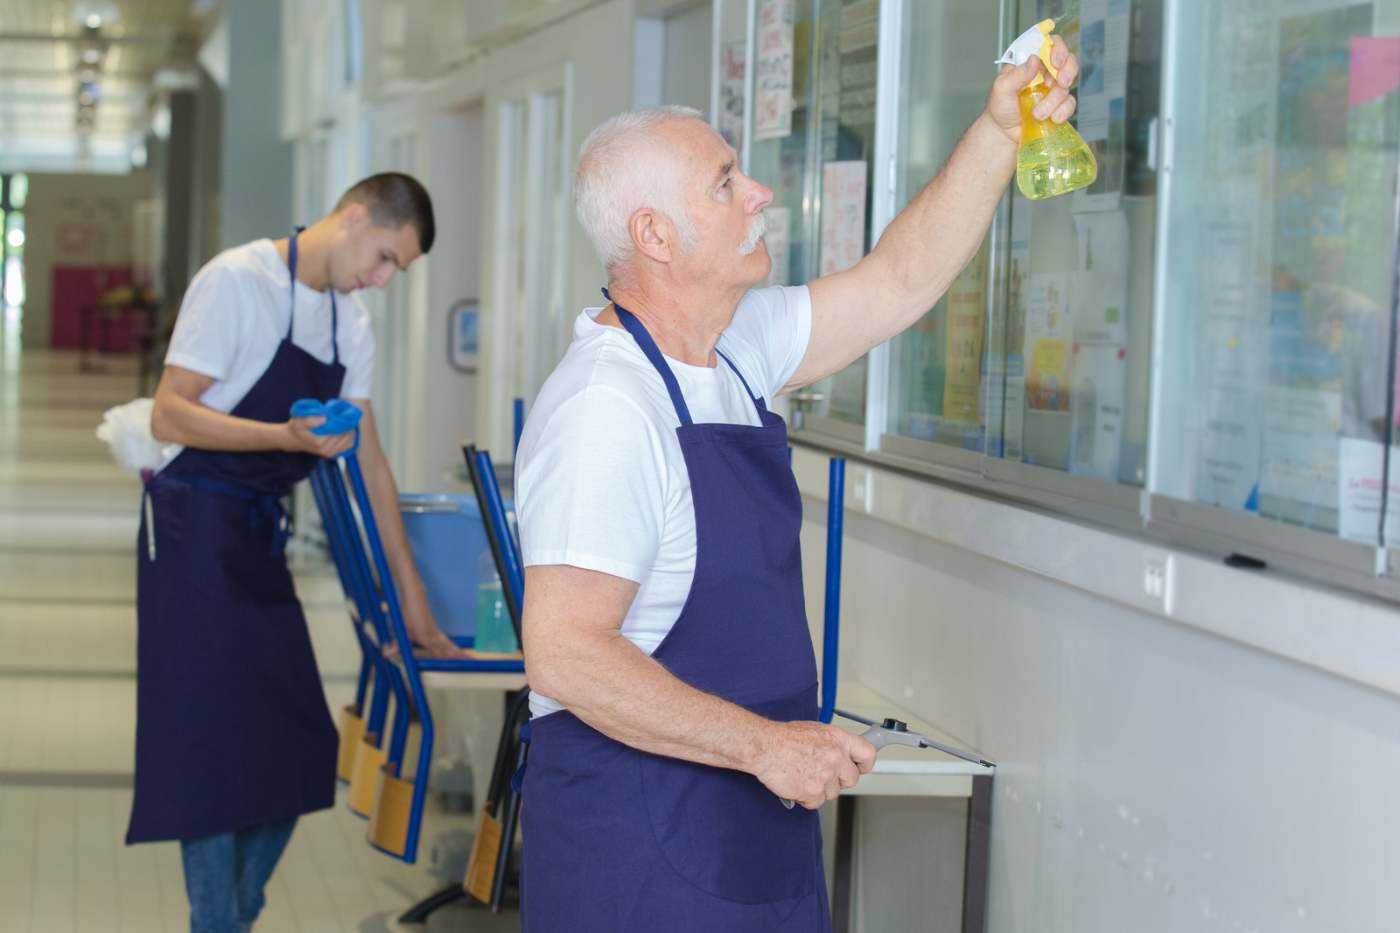 Two People From A Janitorial Service Cleaning A School